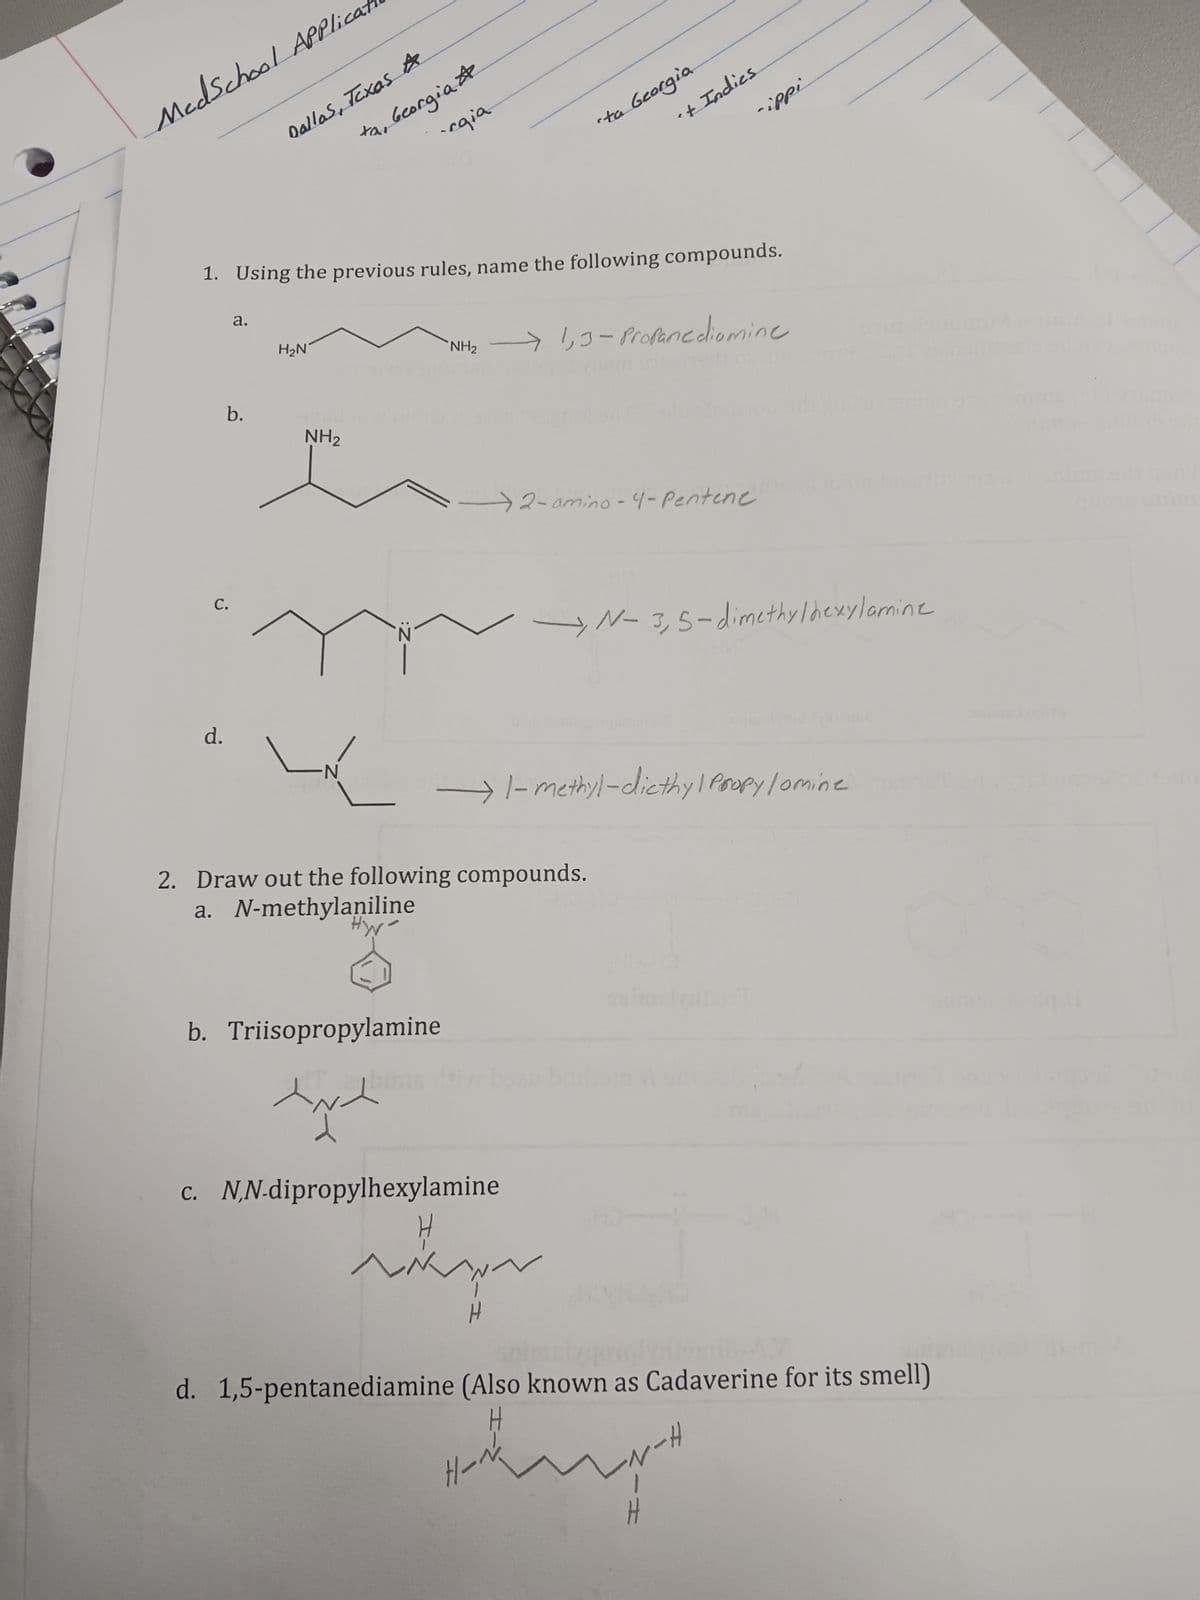 MedSchool Applicat
C.
d.
a.
b.
Dallas, Texas A
ха
1. Using the previous rules, name the following compounds.
H₂N
Georgia #
·rgia
NH₂
-N:
b. Triisopropylamine
cta Georgia
"NH₂ → 1,3-Propanediomine
't Indies
2. Draw out the following compounds.
a. N-methylaniline
HW
c. N,N-dipropylhexylamine
→2-amino-4-Pentene
-N __→ 1-methyl-dicthy | Propy /omine
-ippi
H-
→N-3,5-dimethylhexylamine
skyr
H
au boris
d. 1,5-pentanediamine (Also known as Cadaverine for its smell)
-N-H
huge
H
quong unima